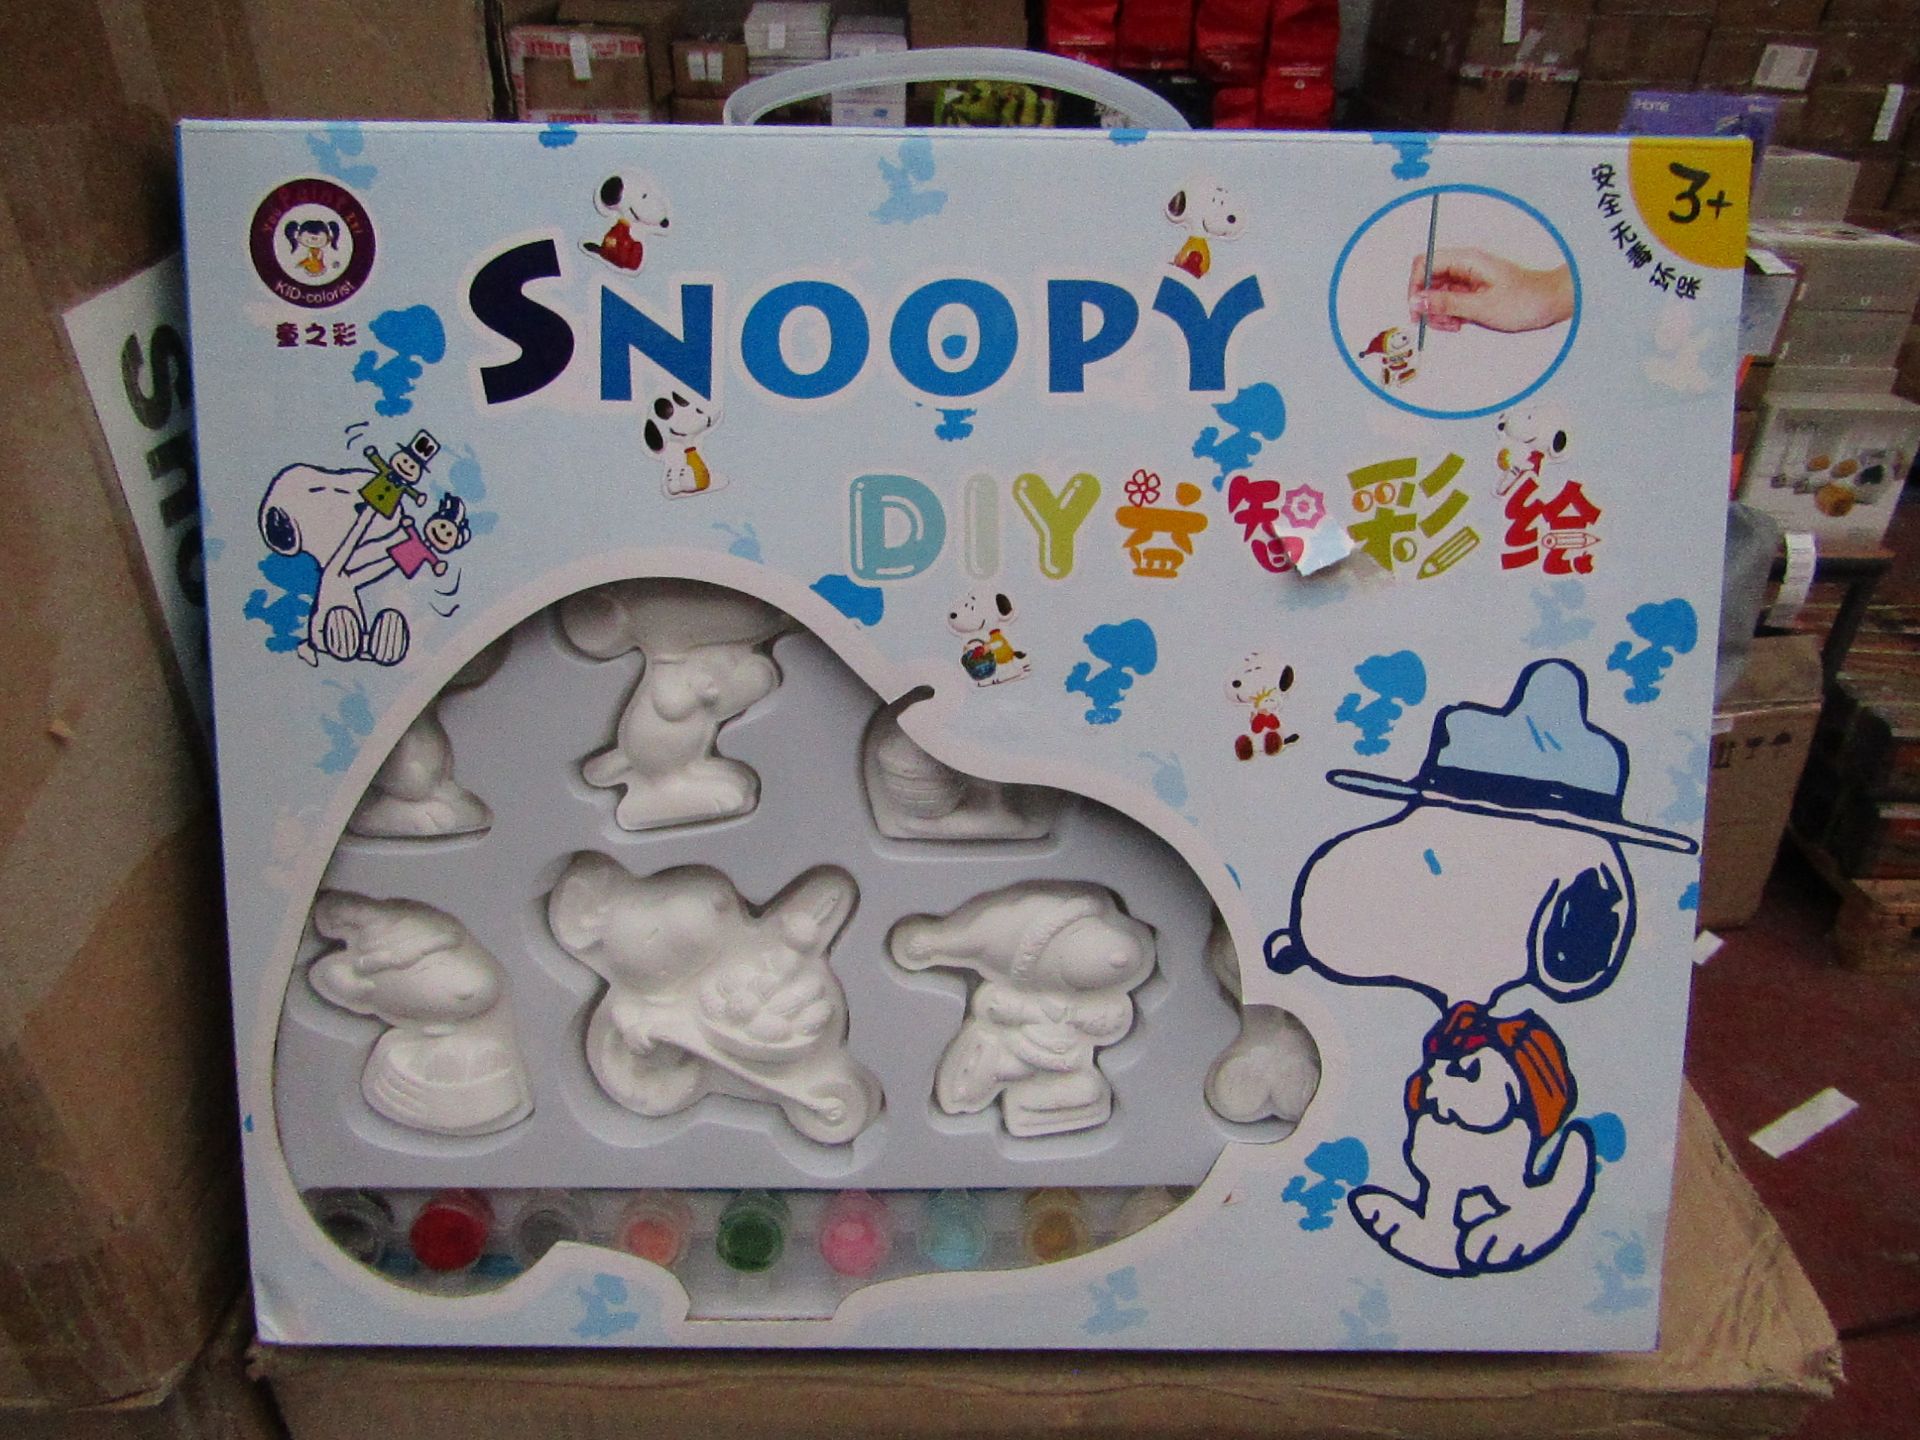 YouPaintIt - Snooby DIY Paint Your Own Ornaments 15 Pieces - Unused & Boxed.